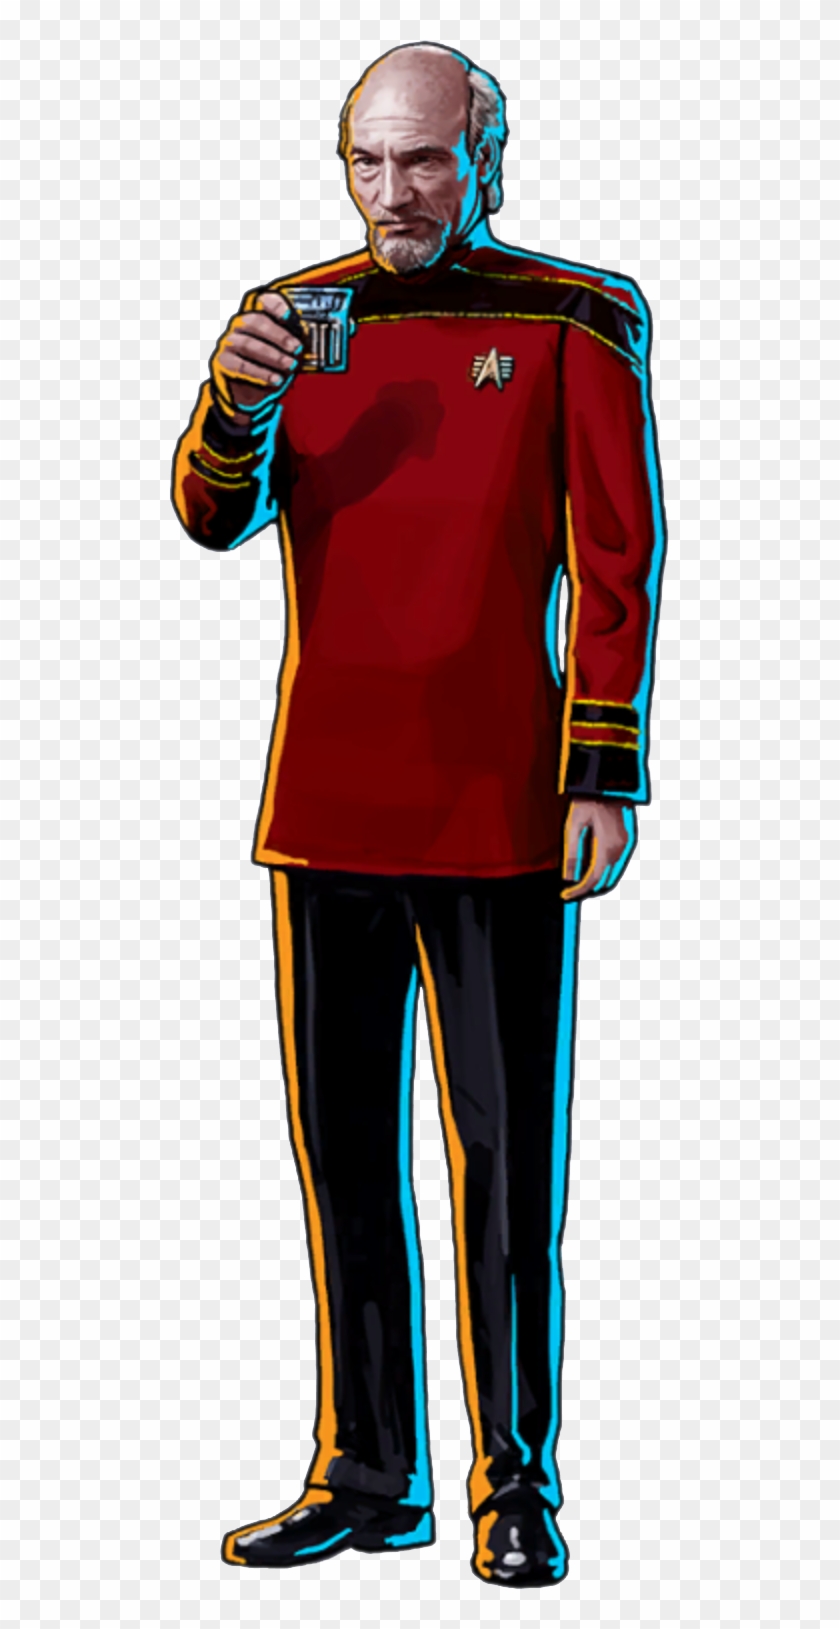 Admiral Picard Is A Member Of The Captain Kellyplanet - Belt Clipart #5095228